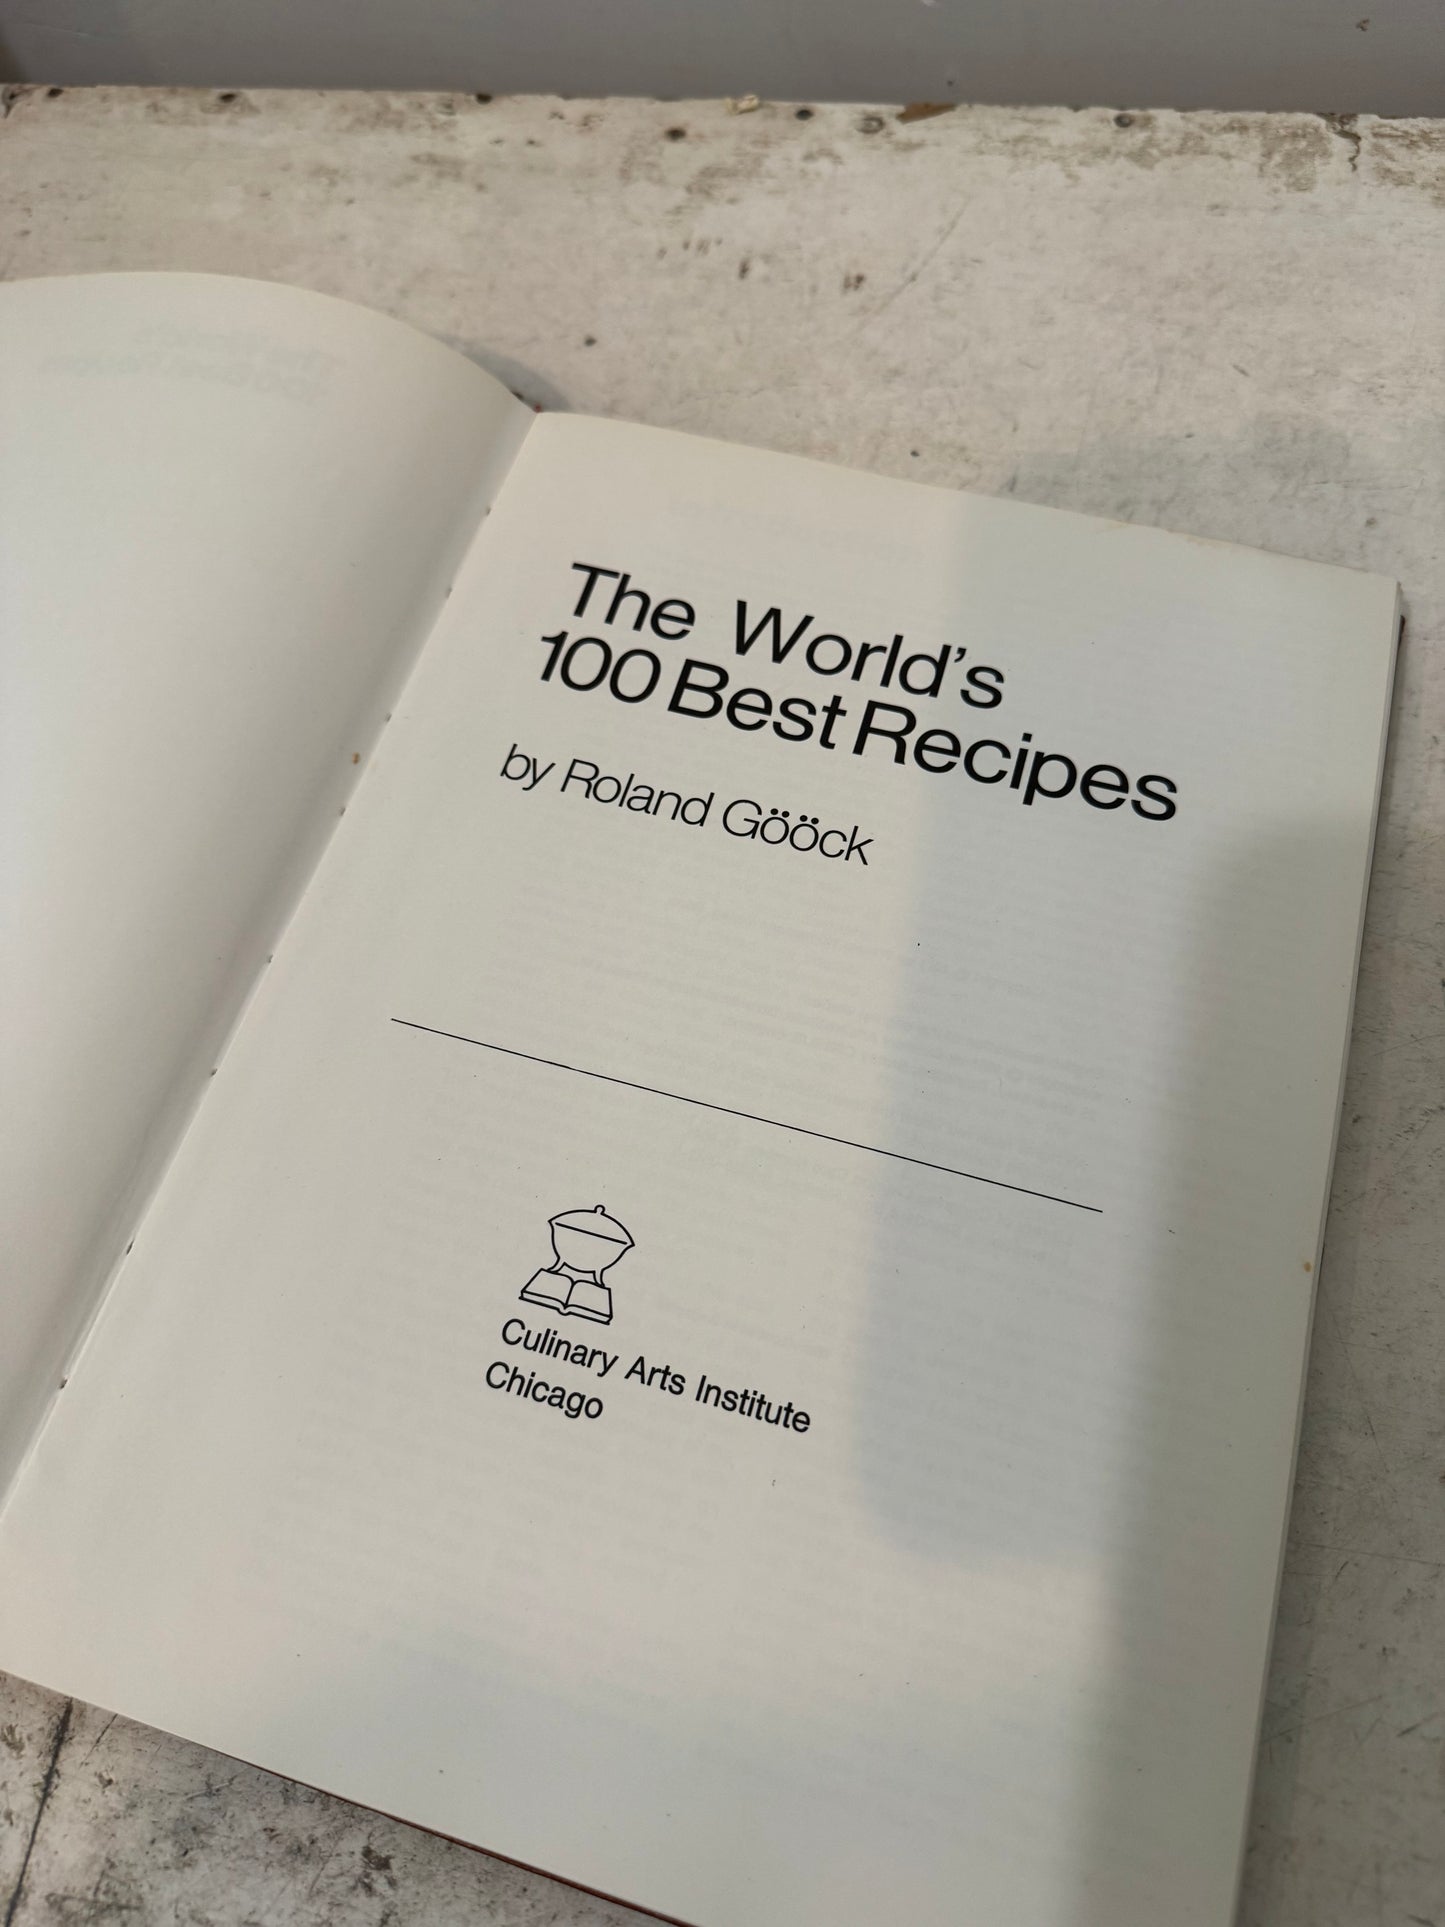 The Worlds 100 Best Recipes by Rolond Goock (hardcover, 1973)- Book